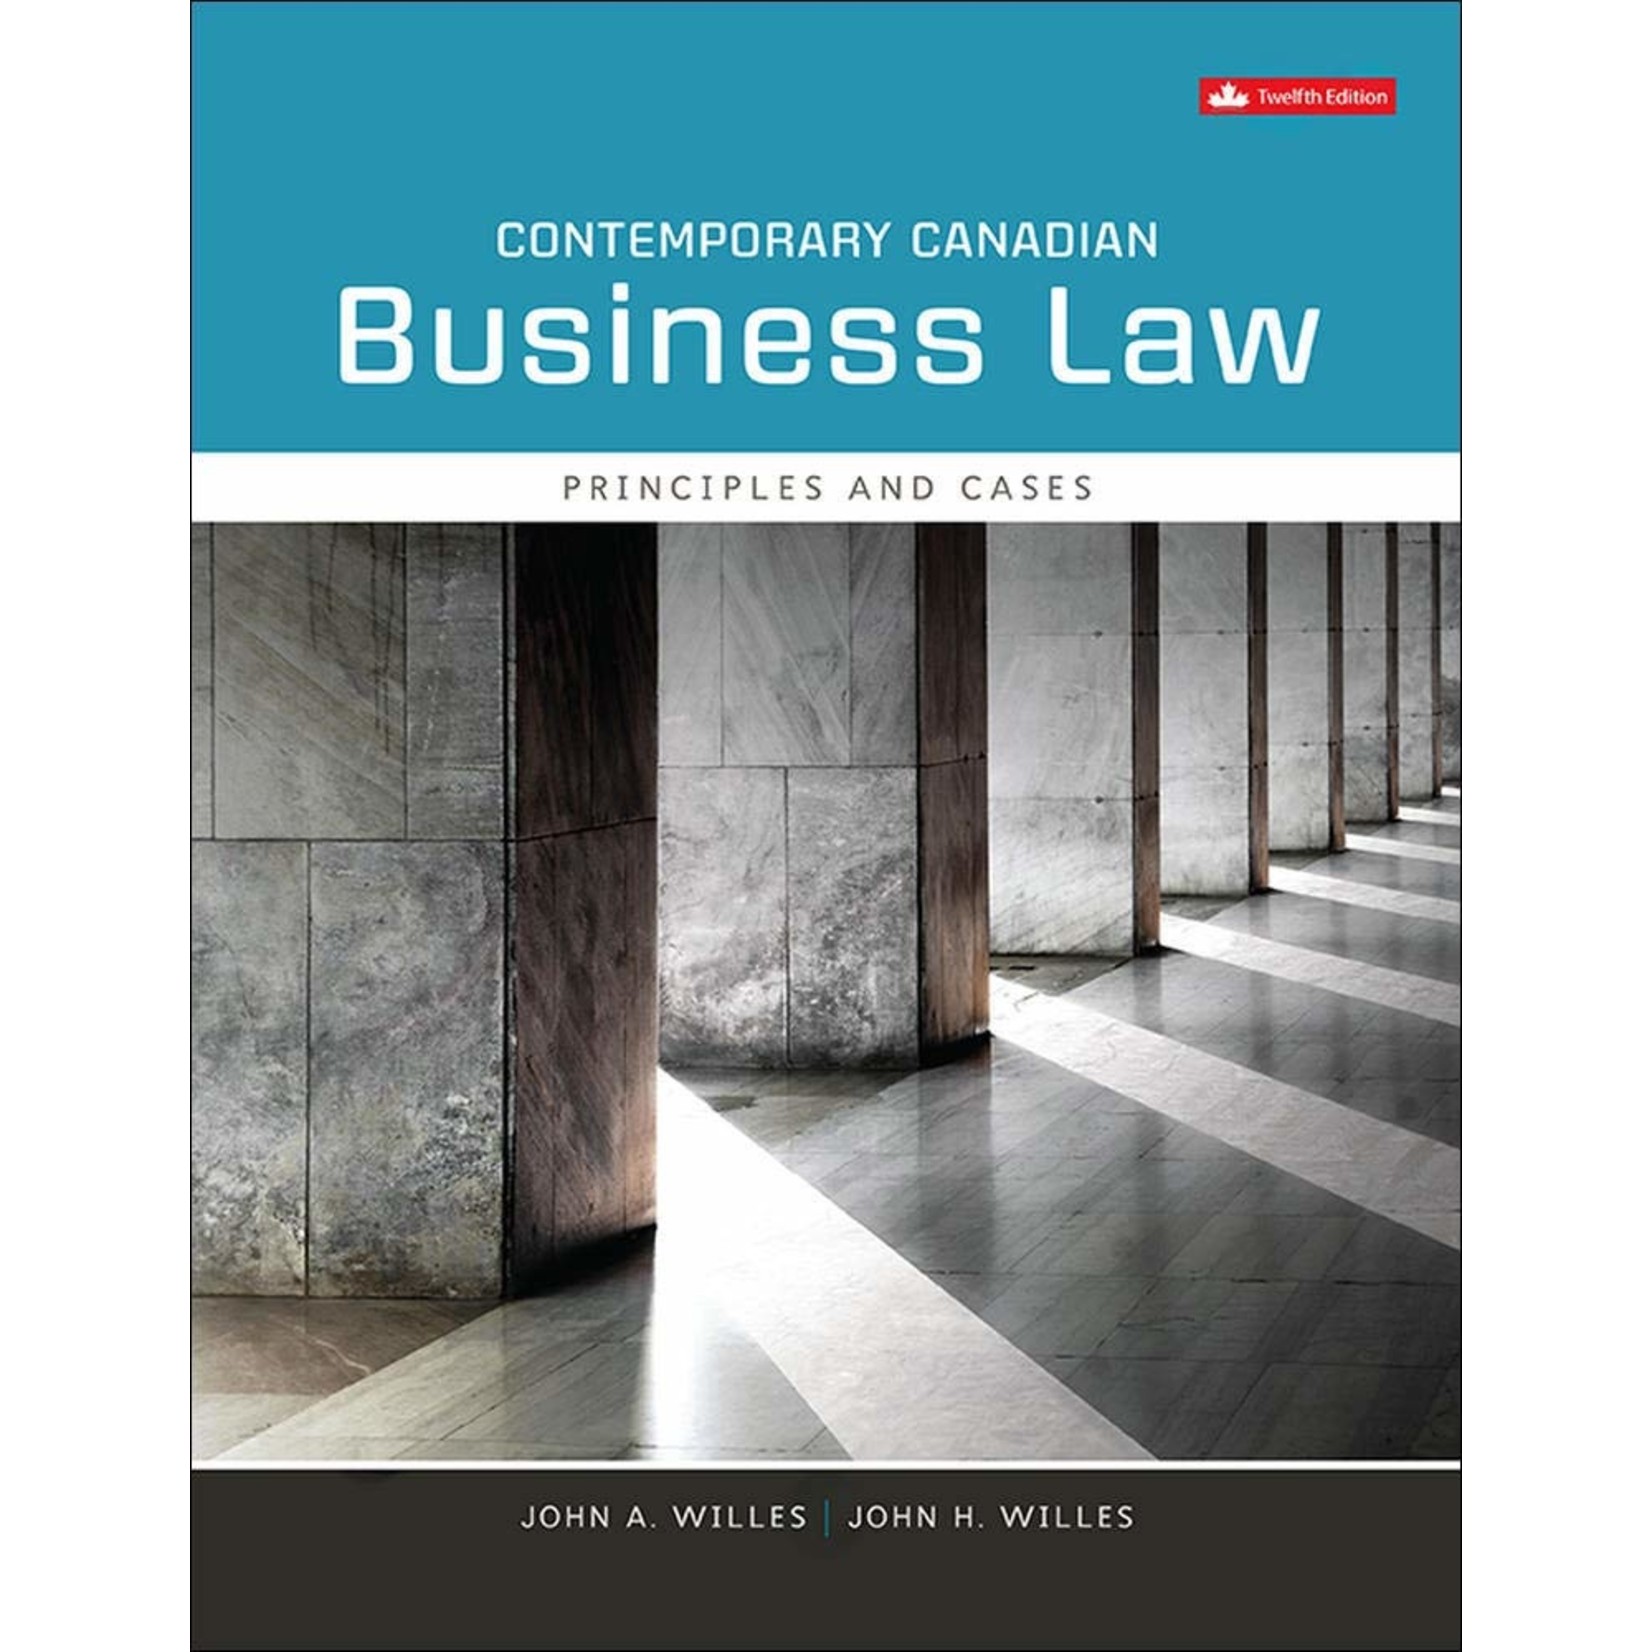 Contemporary Canadian Business Law, 12th Ed.